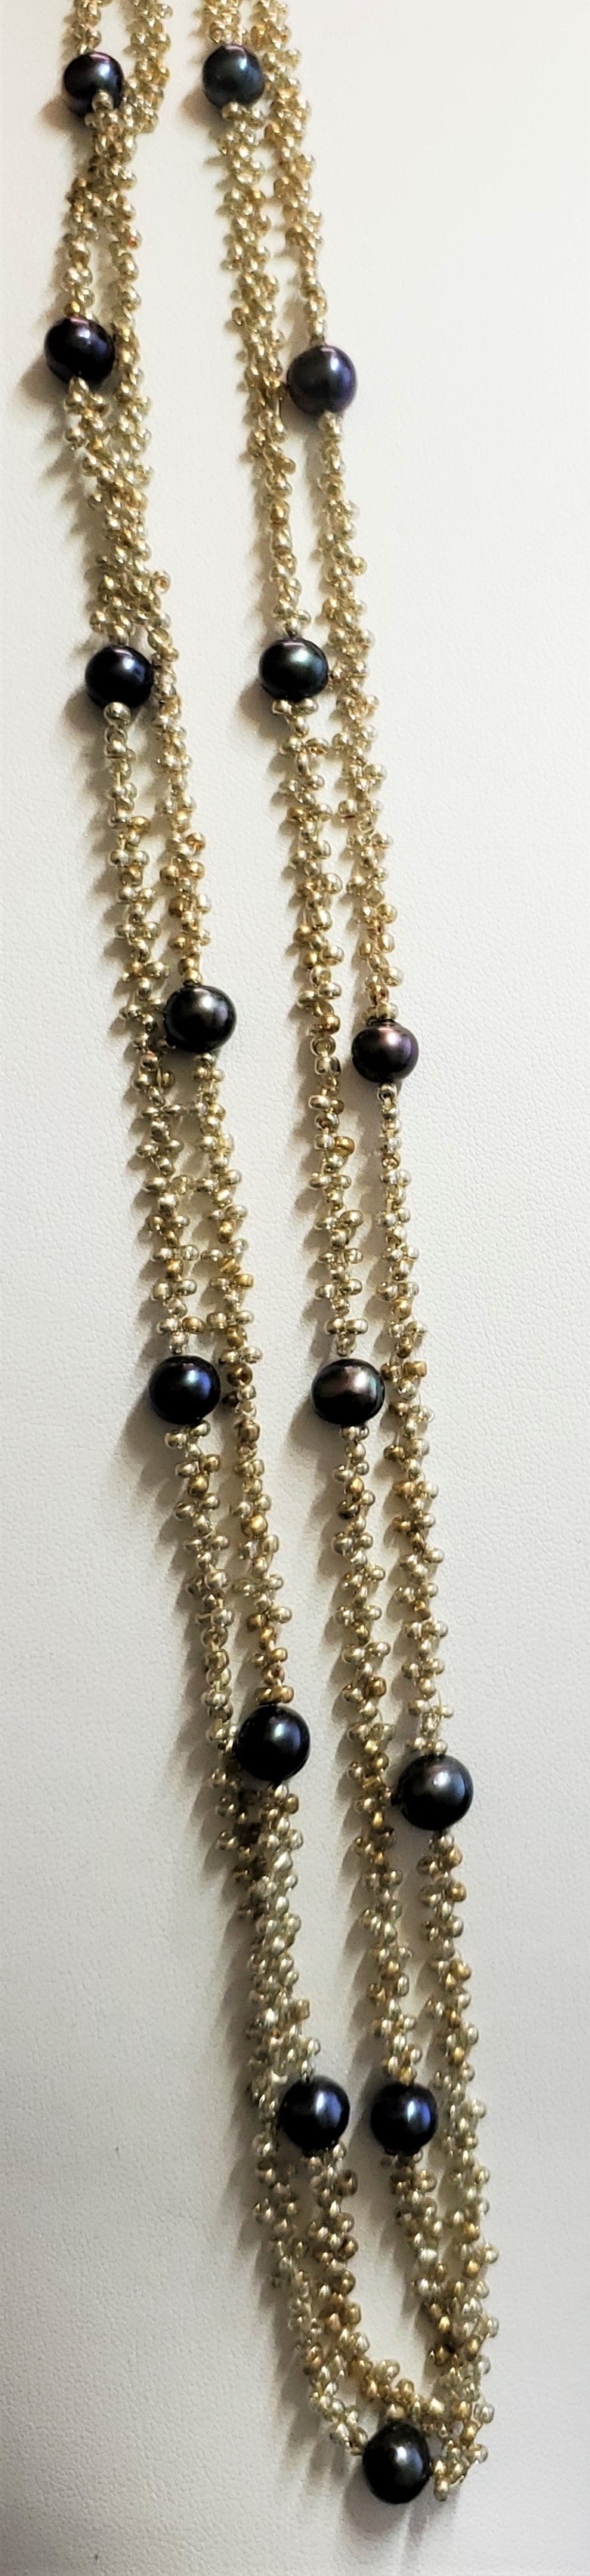 Handmade Gold Beaded Pacific Black Pearl Wrap Around Necklace